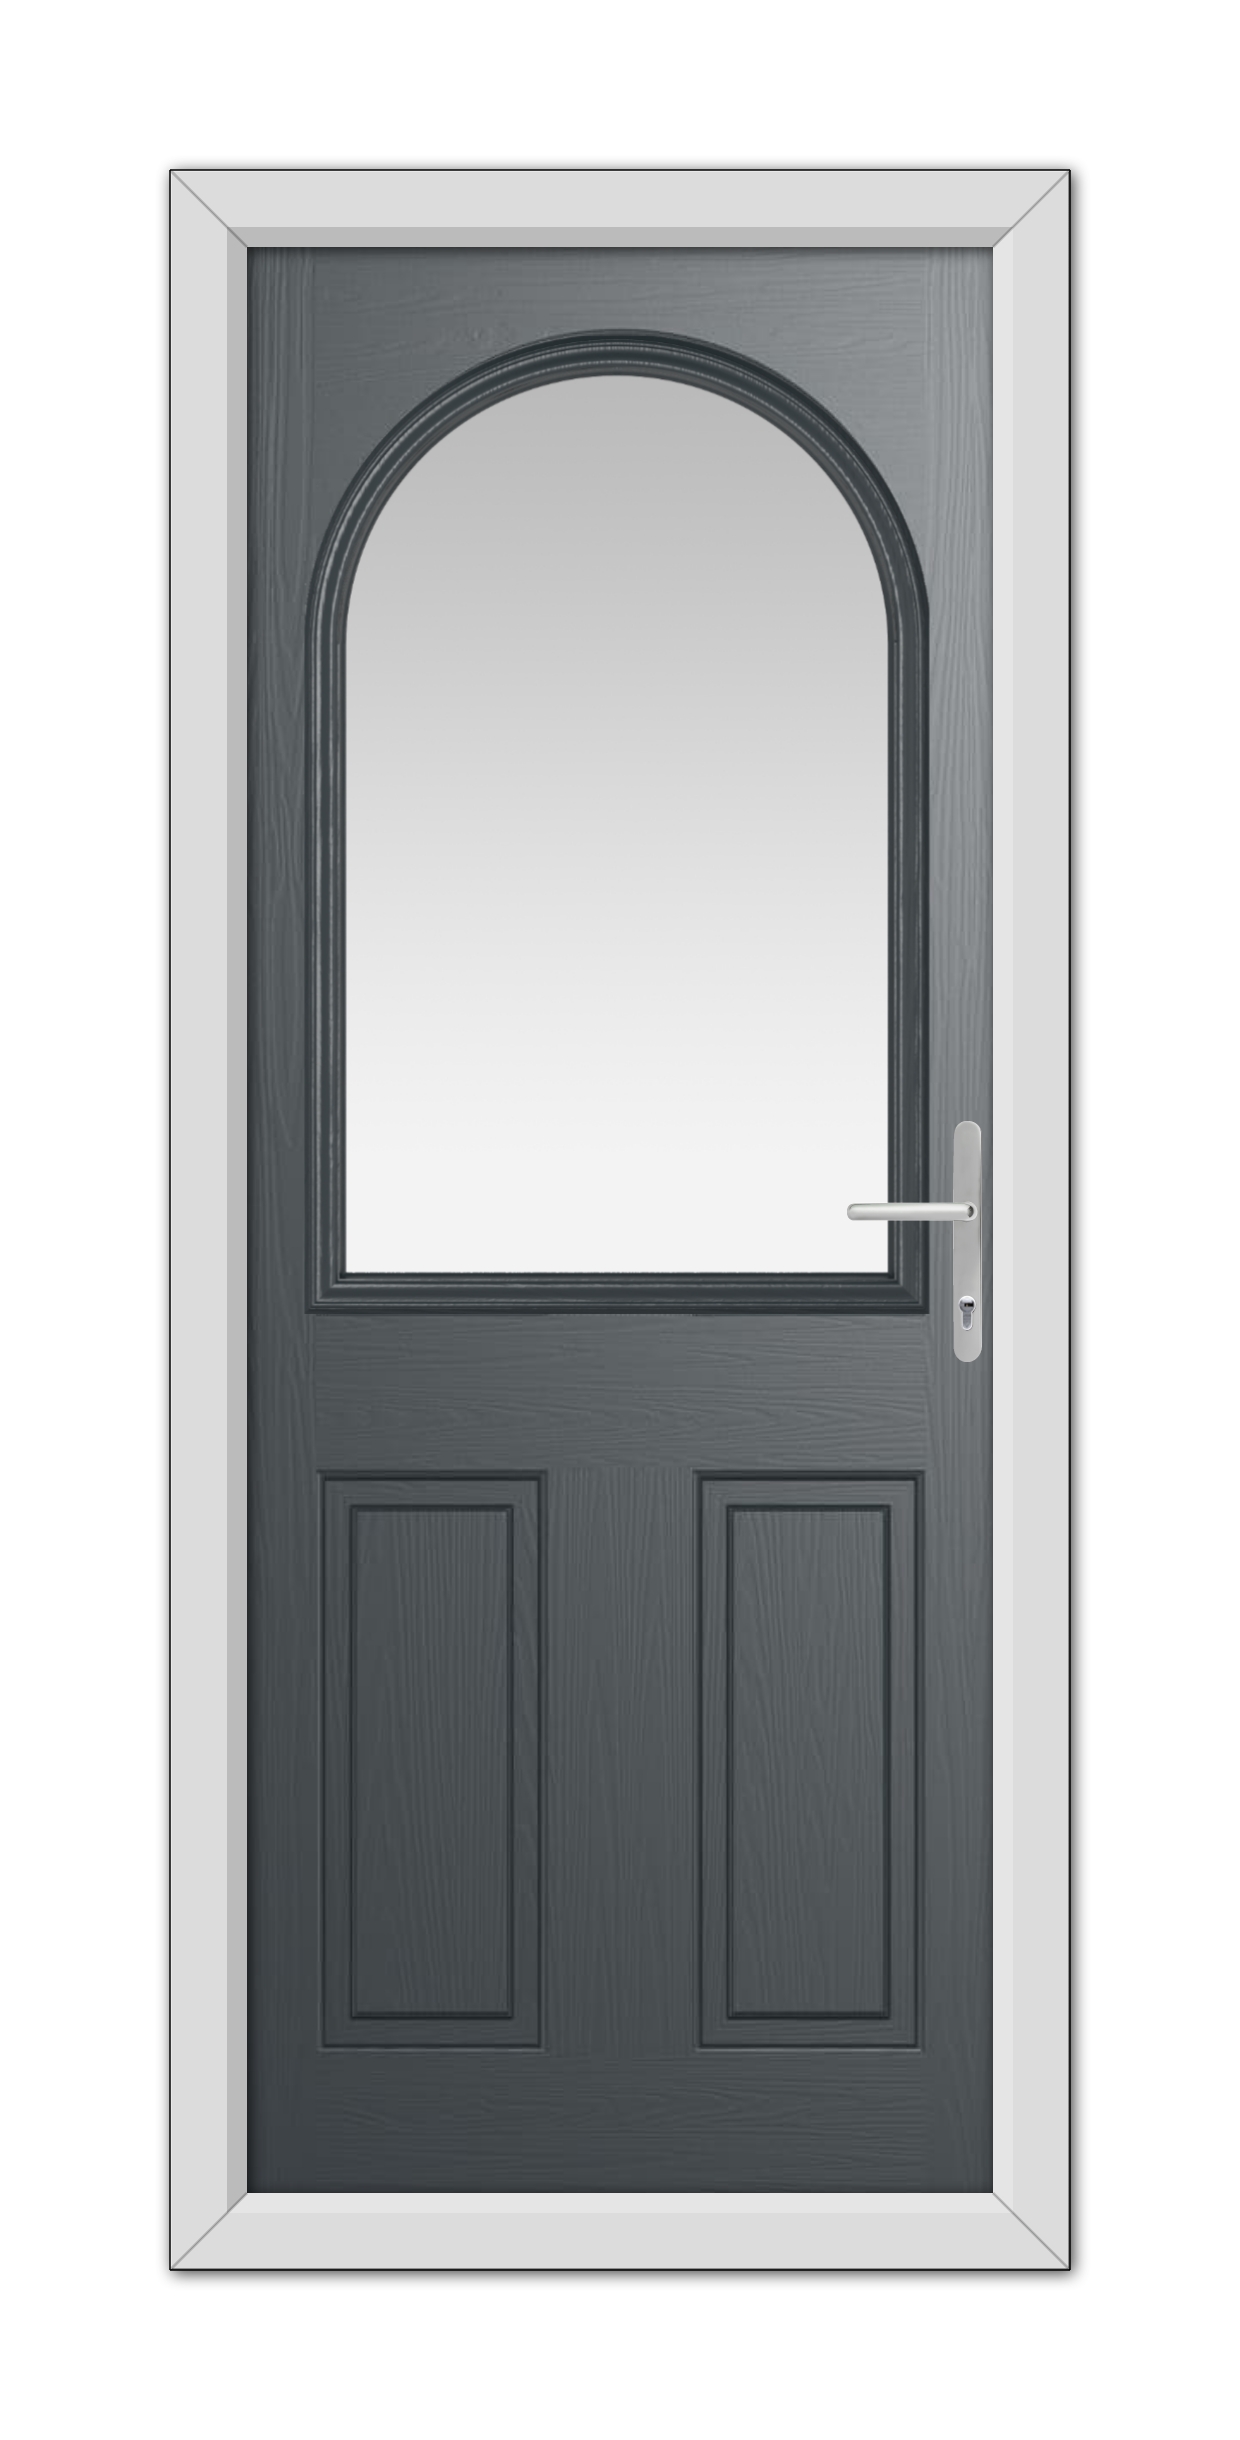 A Anthracite Grey Grafton Composite Door 48mm Timber Core with an arched window at the top, equipped with a modern handle, set in a white frame.